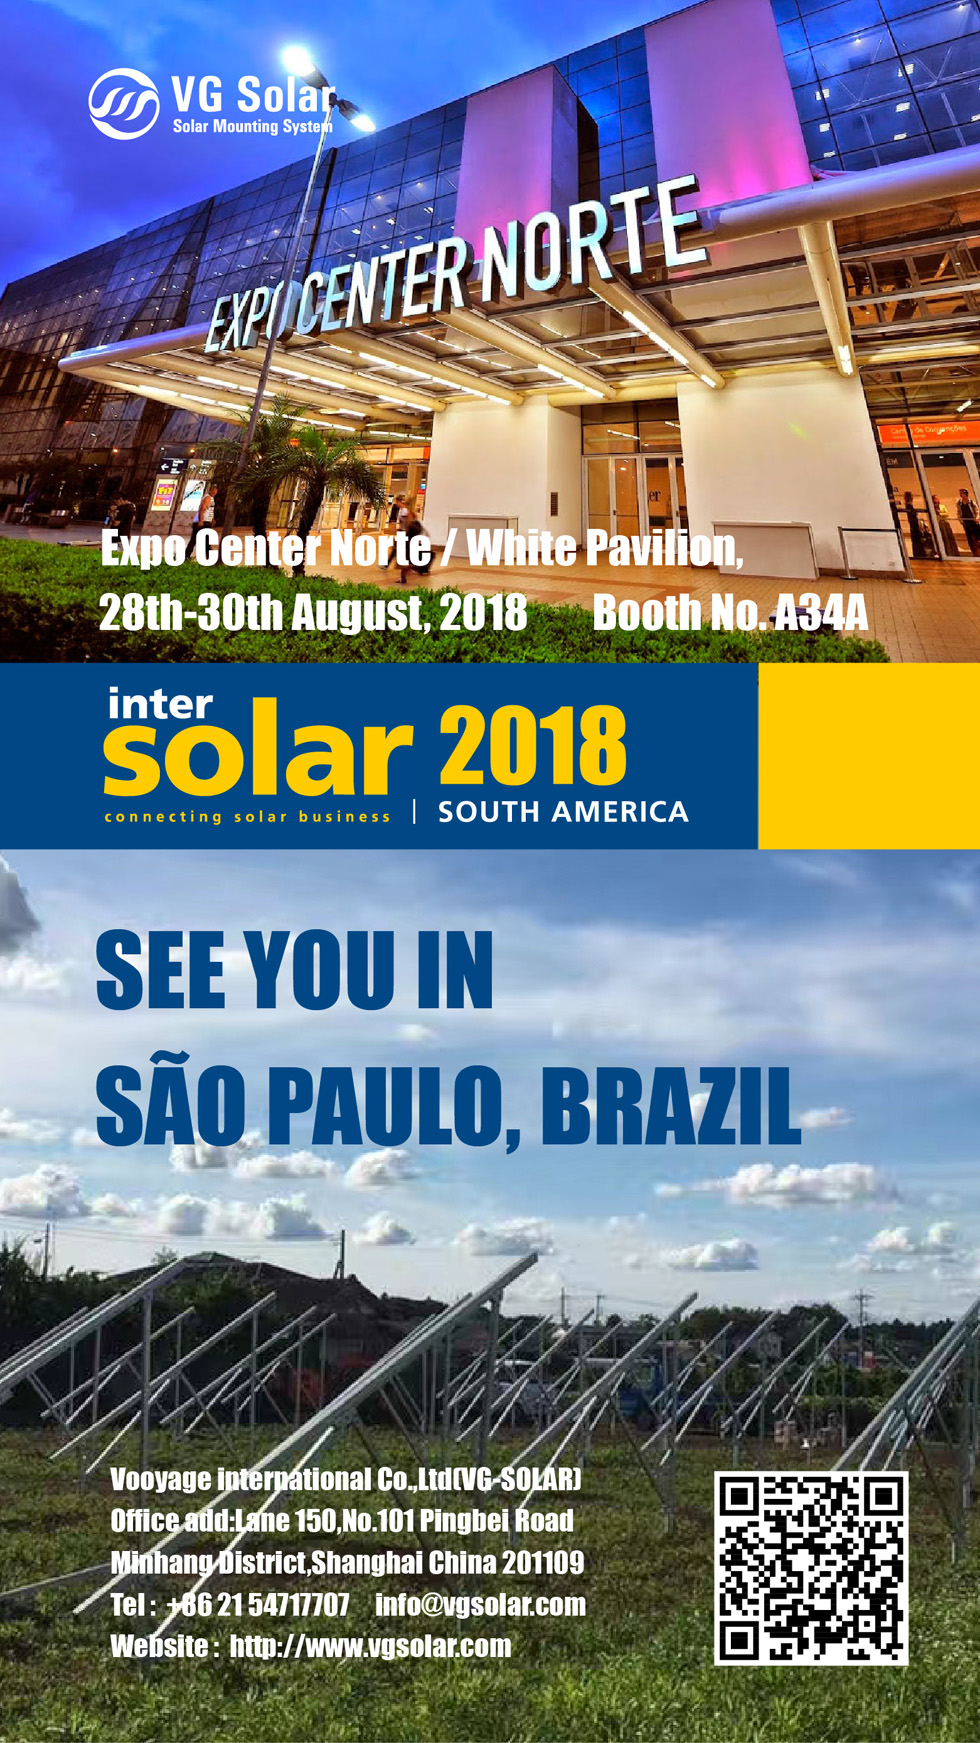 VG Solar was invited to attend the Intersolar South America 2018 which was held in the Expo Center Norte in Sao Paulo, Brazil.